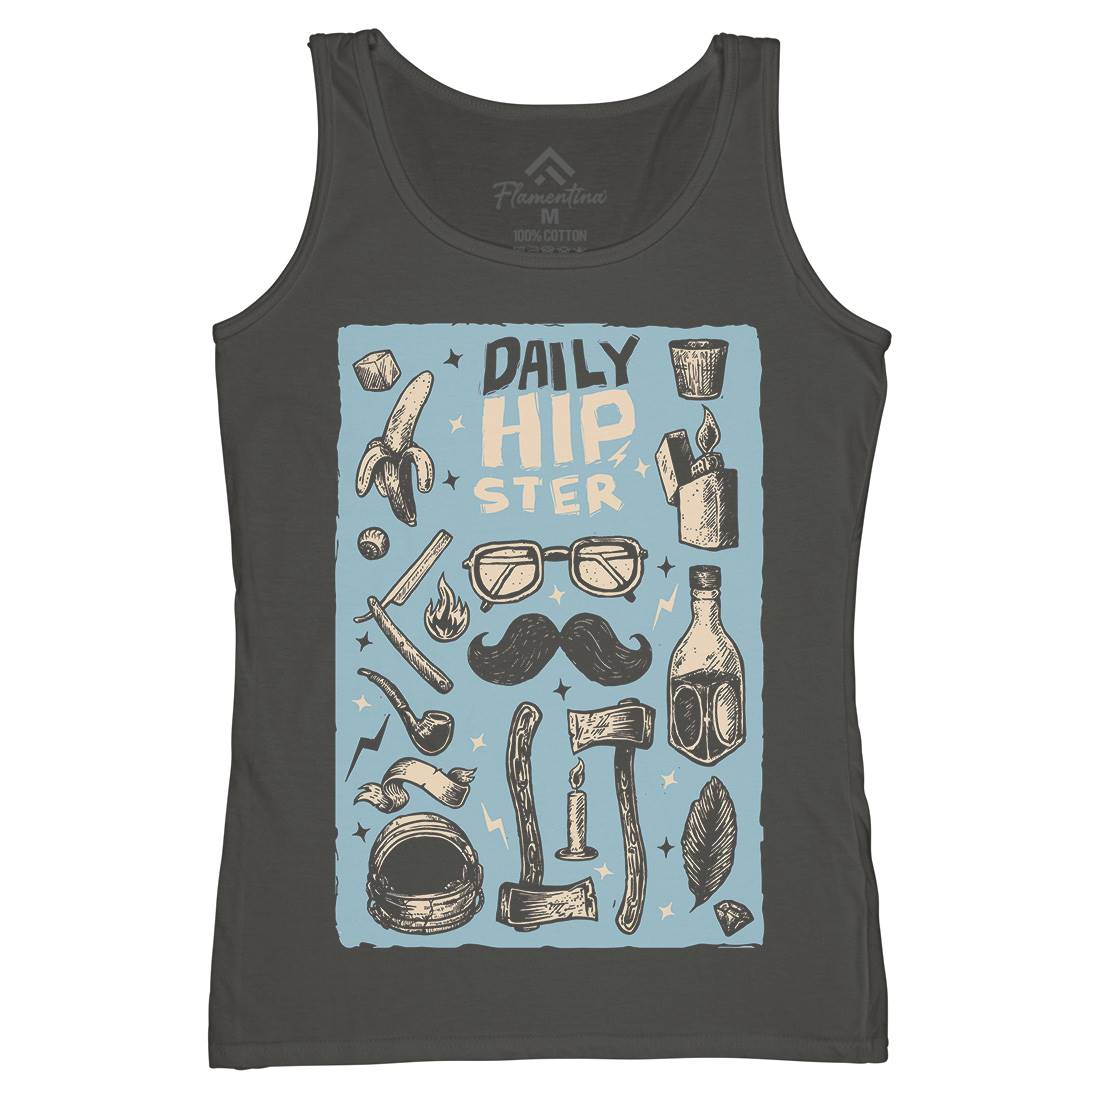 Daily Hipster Womens Organic Tank Top Vest Barber A544